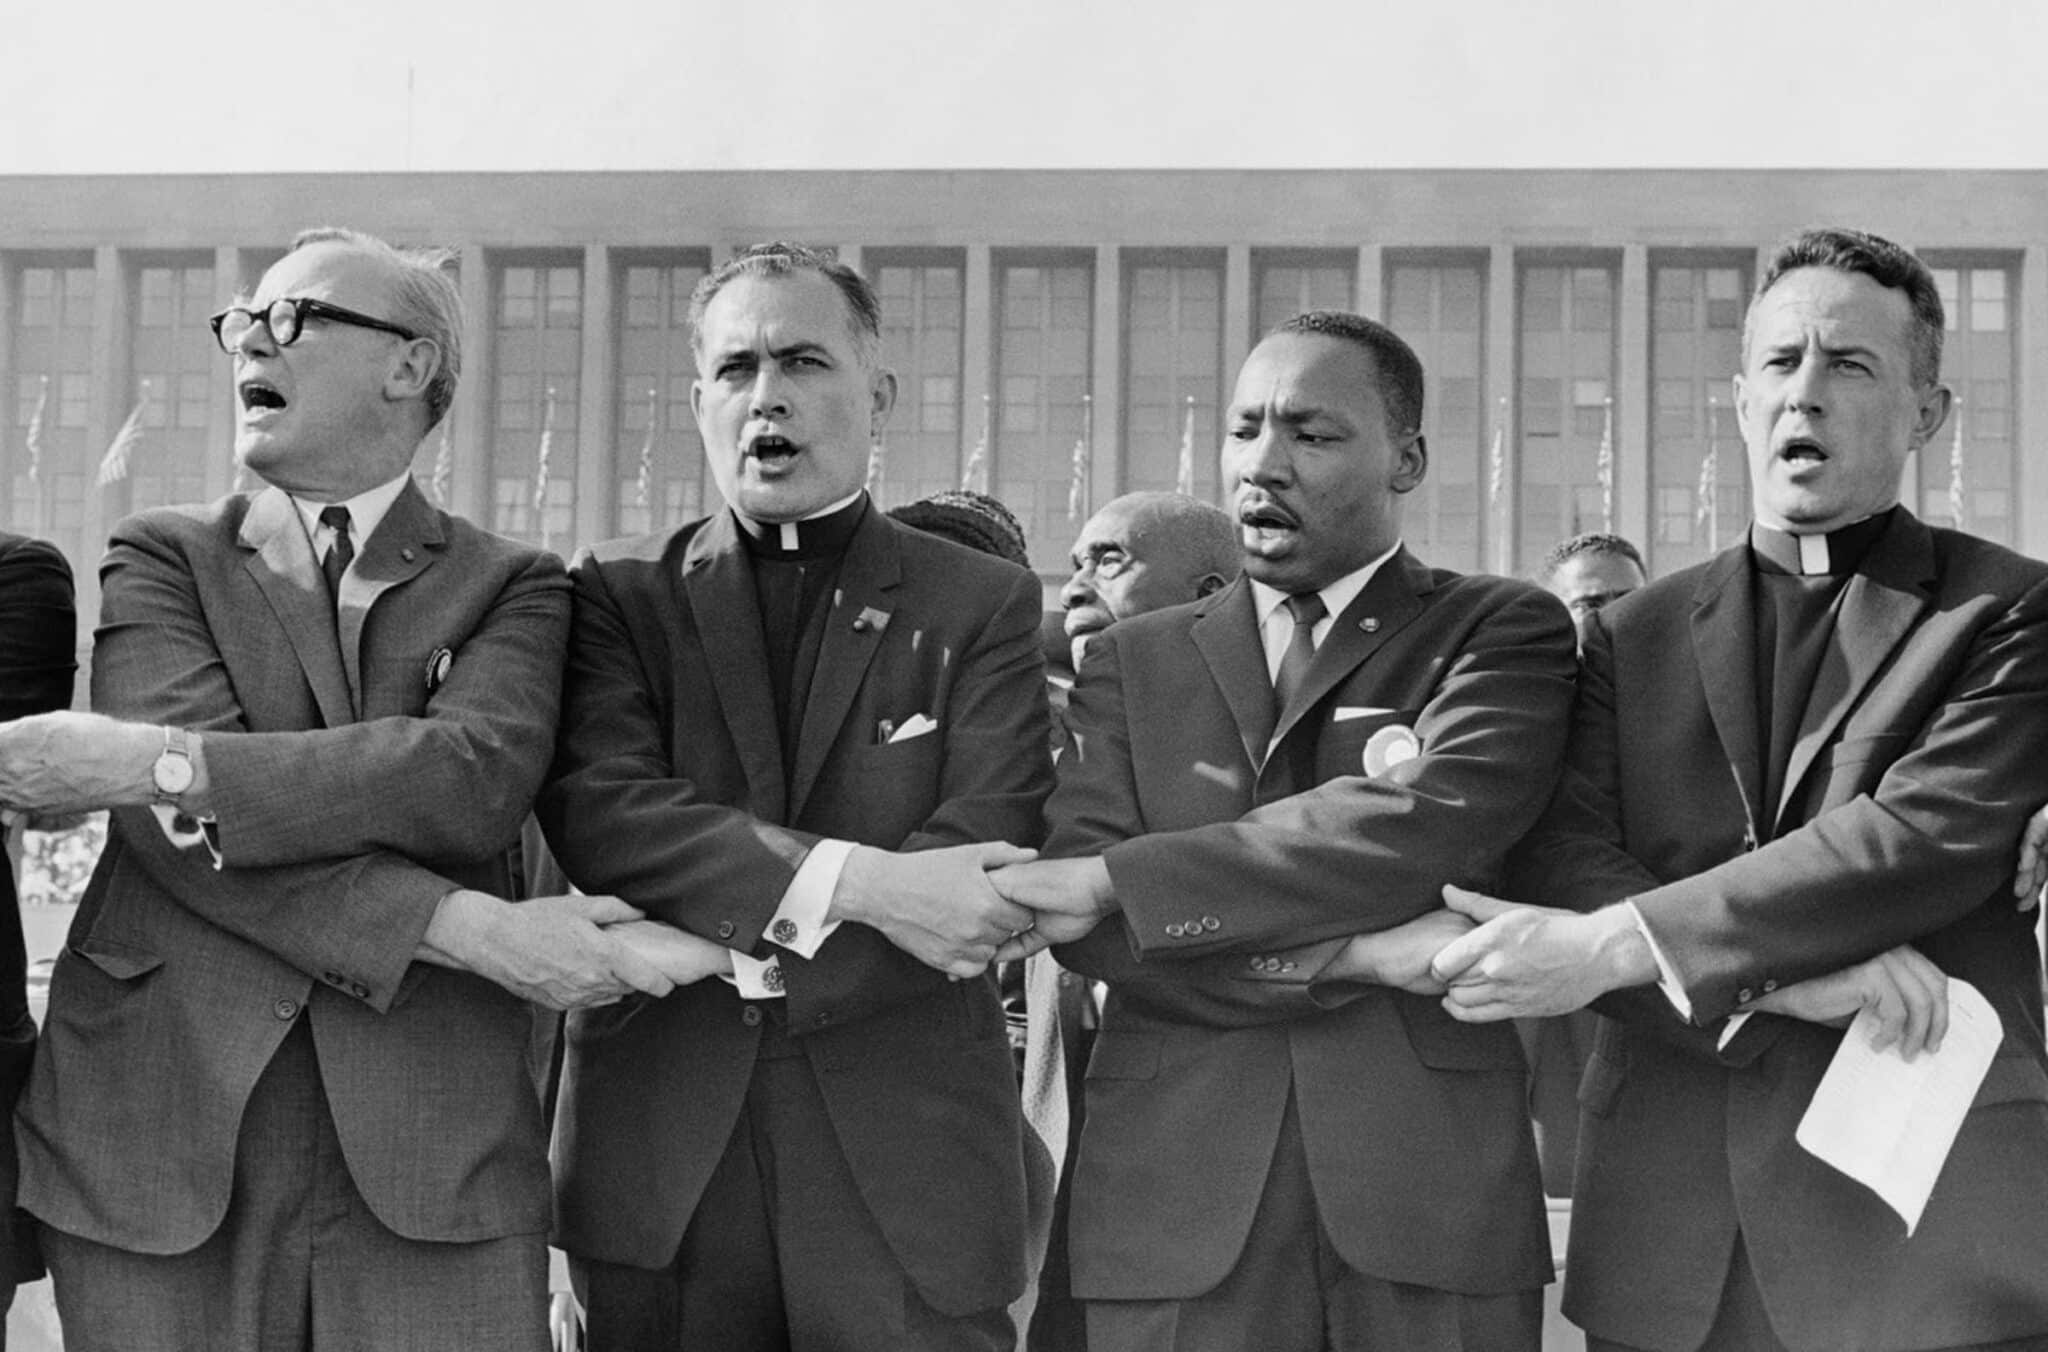 Holy Cross Father Theodore Hesburgh, then president of the University of Notre Dame, second from left, joins hands with the Rev. Dr. Martin Luther King Jr., the Rev. Edgar Chandler and Msgr. Robert J. Hagarty of Chicago, far right, in this 1964 file photo. As Rev. King taught, "we must confront the evils of racism and prejudice with the love of Christ," Archbishop Timothy P. Broglio of the U.S. Archdiocese for the Military Services, who is president of the U.S. Conference of Catholic Bishops, said in a Jan. 10, 2024, statement ahead of Martin Luther King Jr. Day Jan. 15. (OSV News photo/courtesy University of Notre Dame)